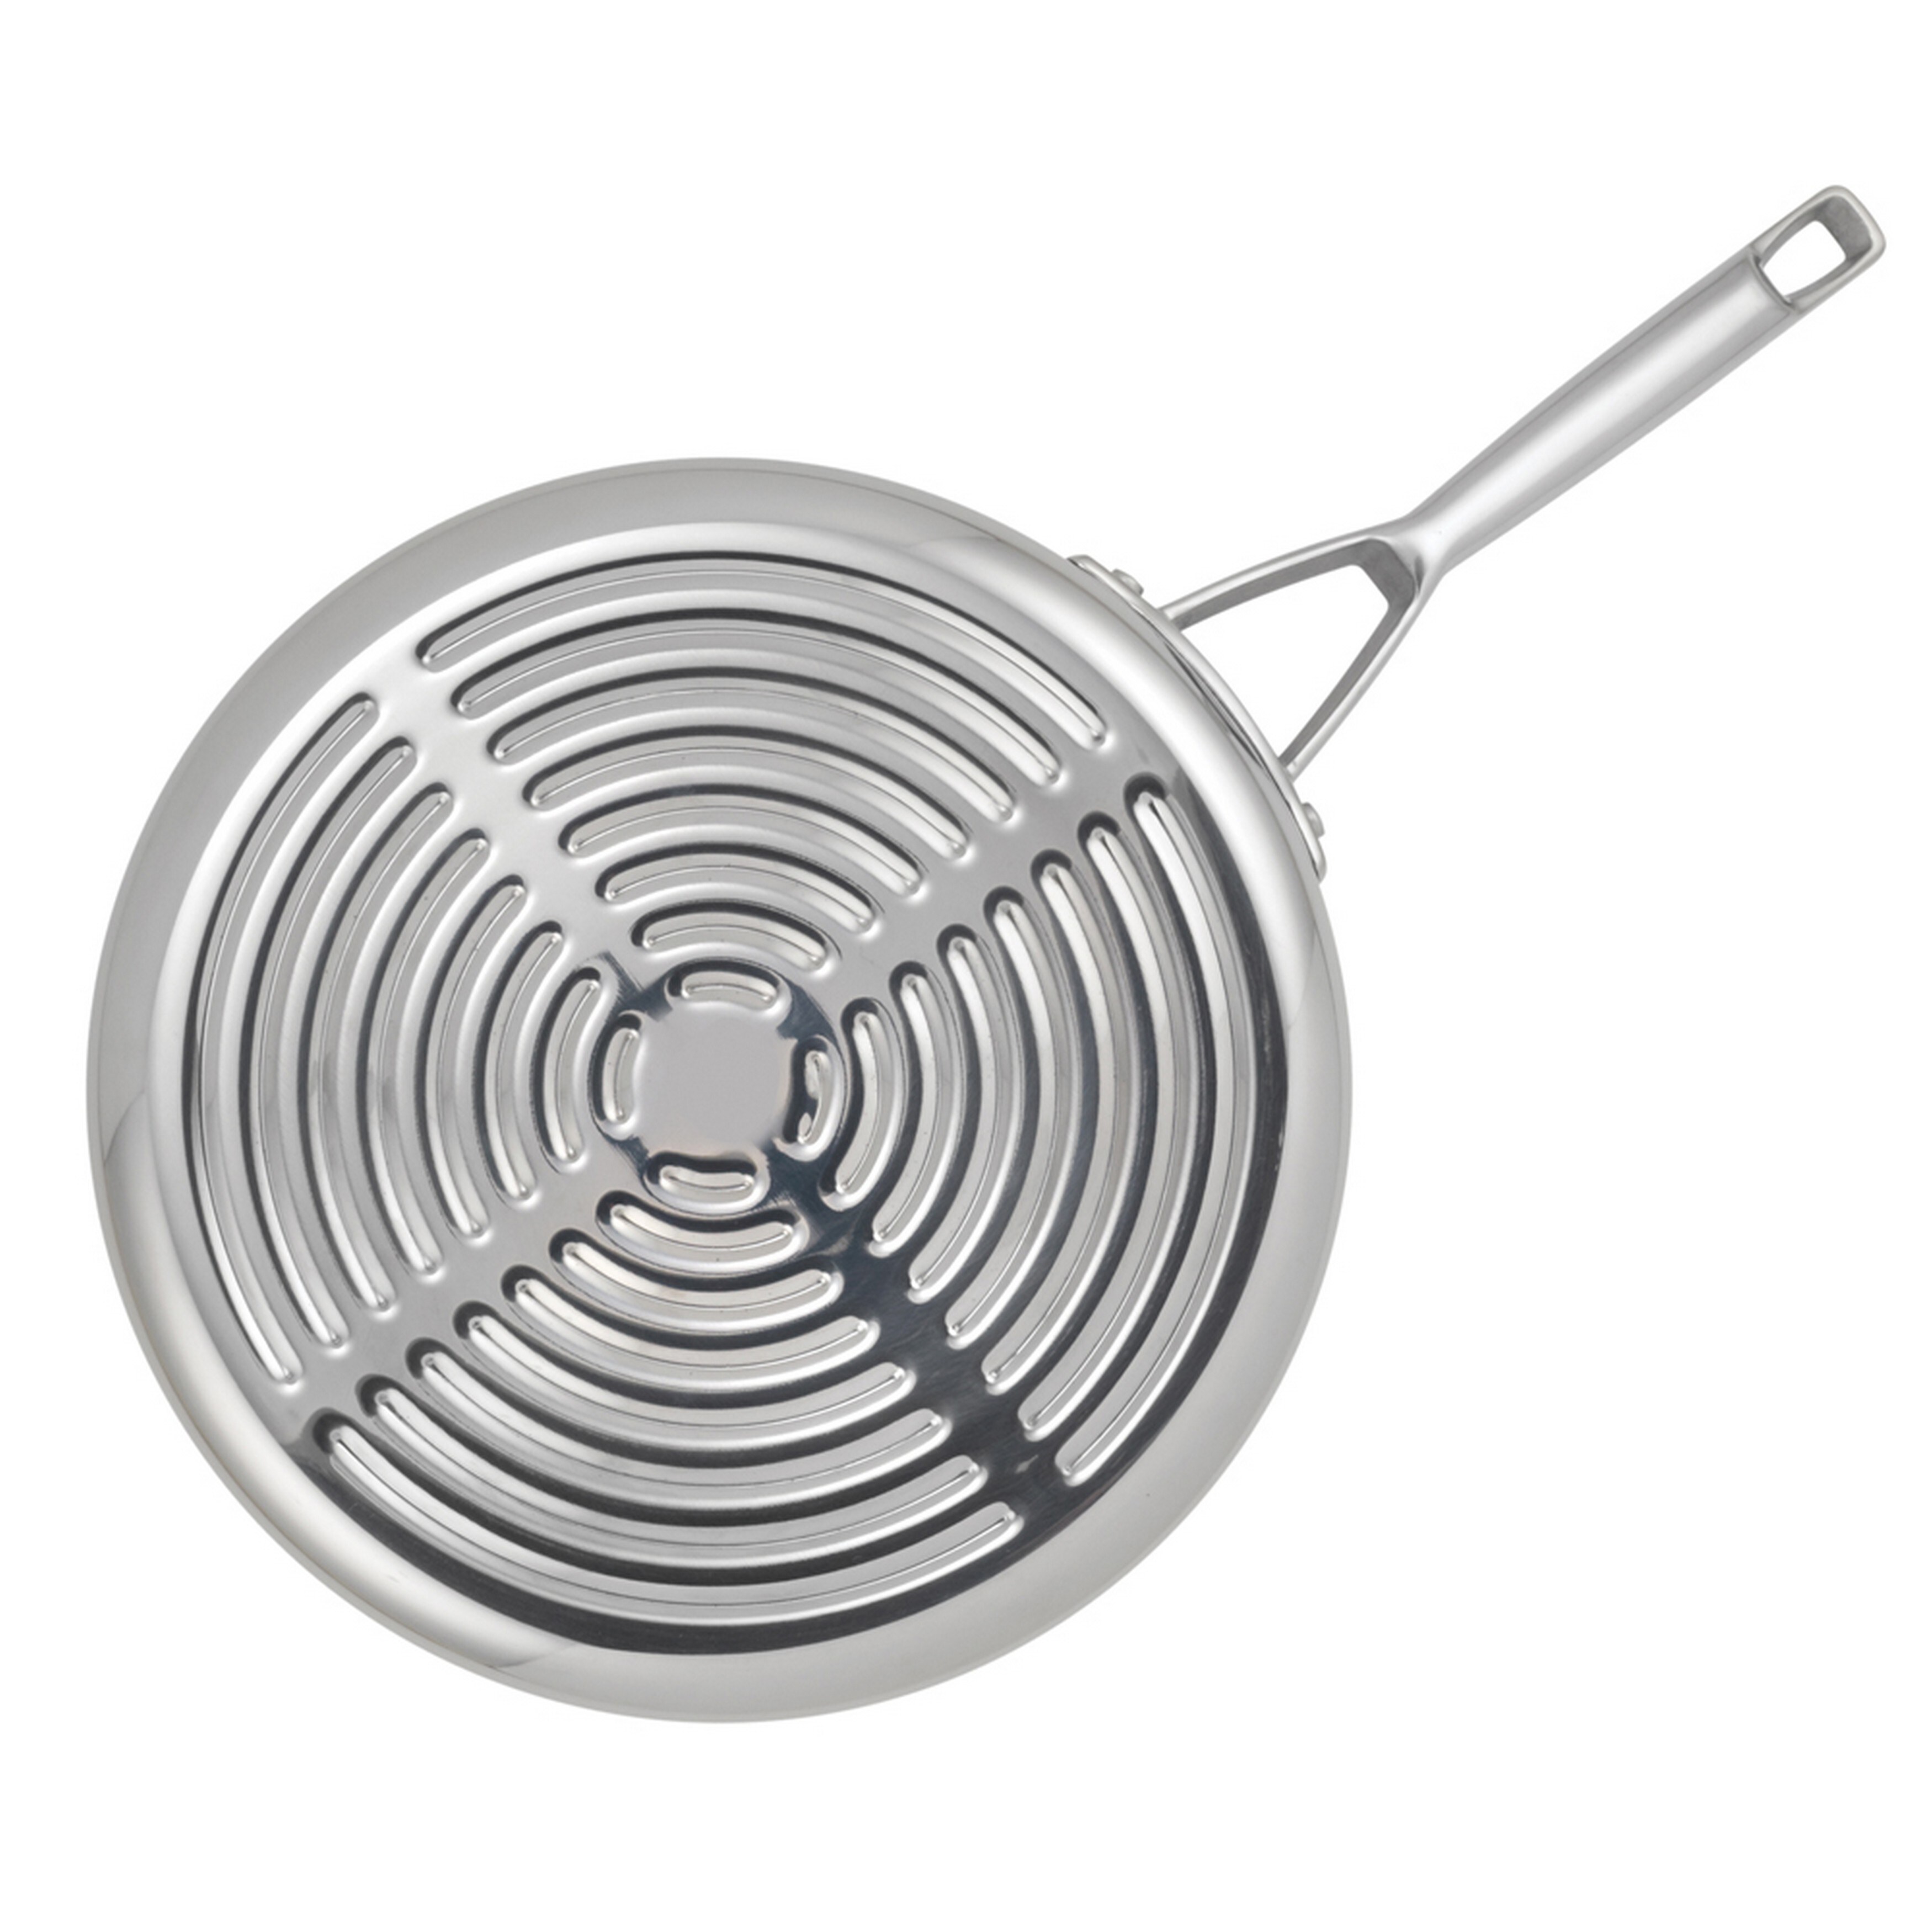 https://ak1.ostkcdn.com/images/products/9206659/Anolon-Tri-Ply-Clad-Stainless-Steel-12-inch-Deep-Round-Grill-Pan-e7eb0800-a185-4845-a002-a99bbf61b64f.jpg